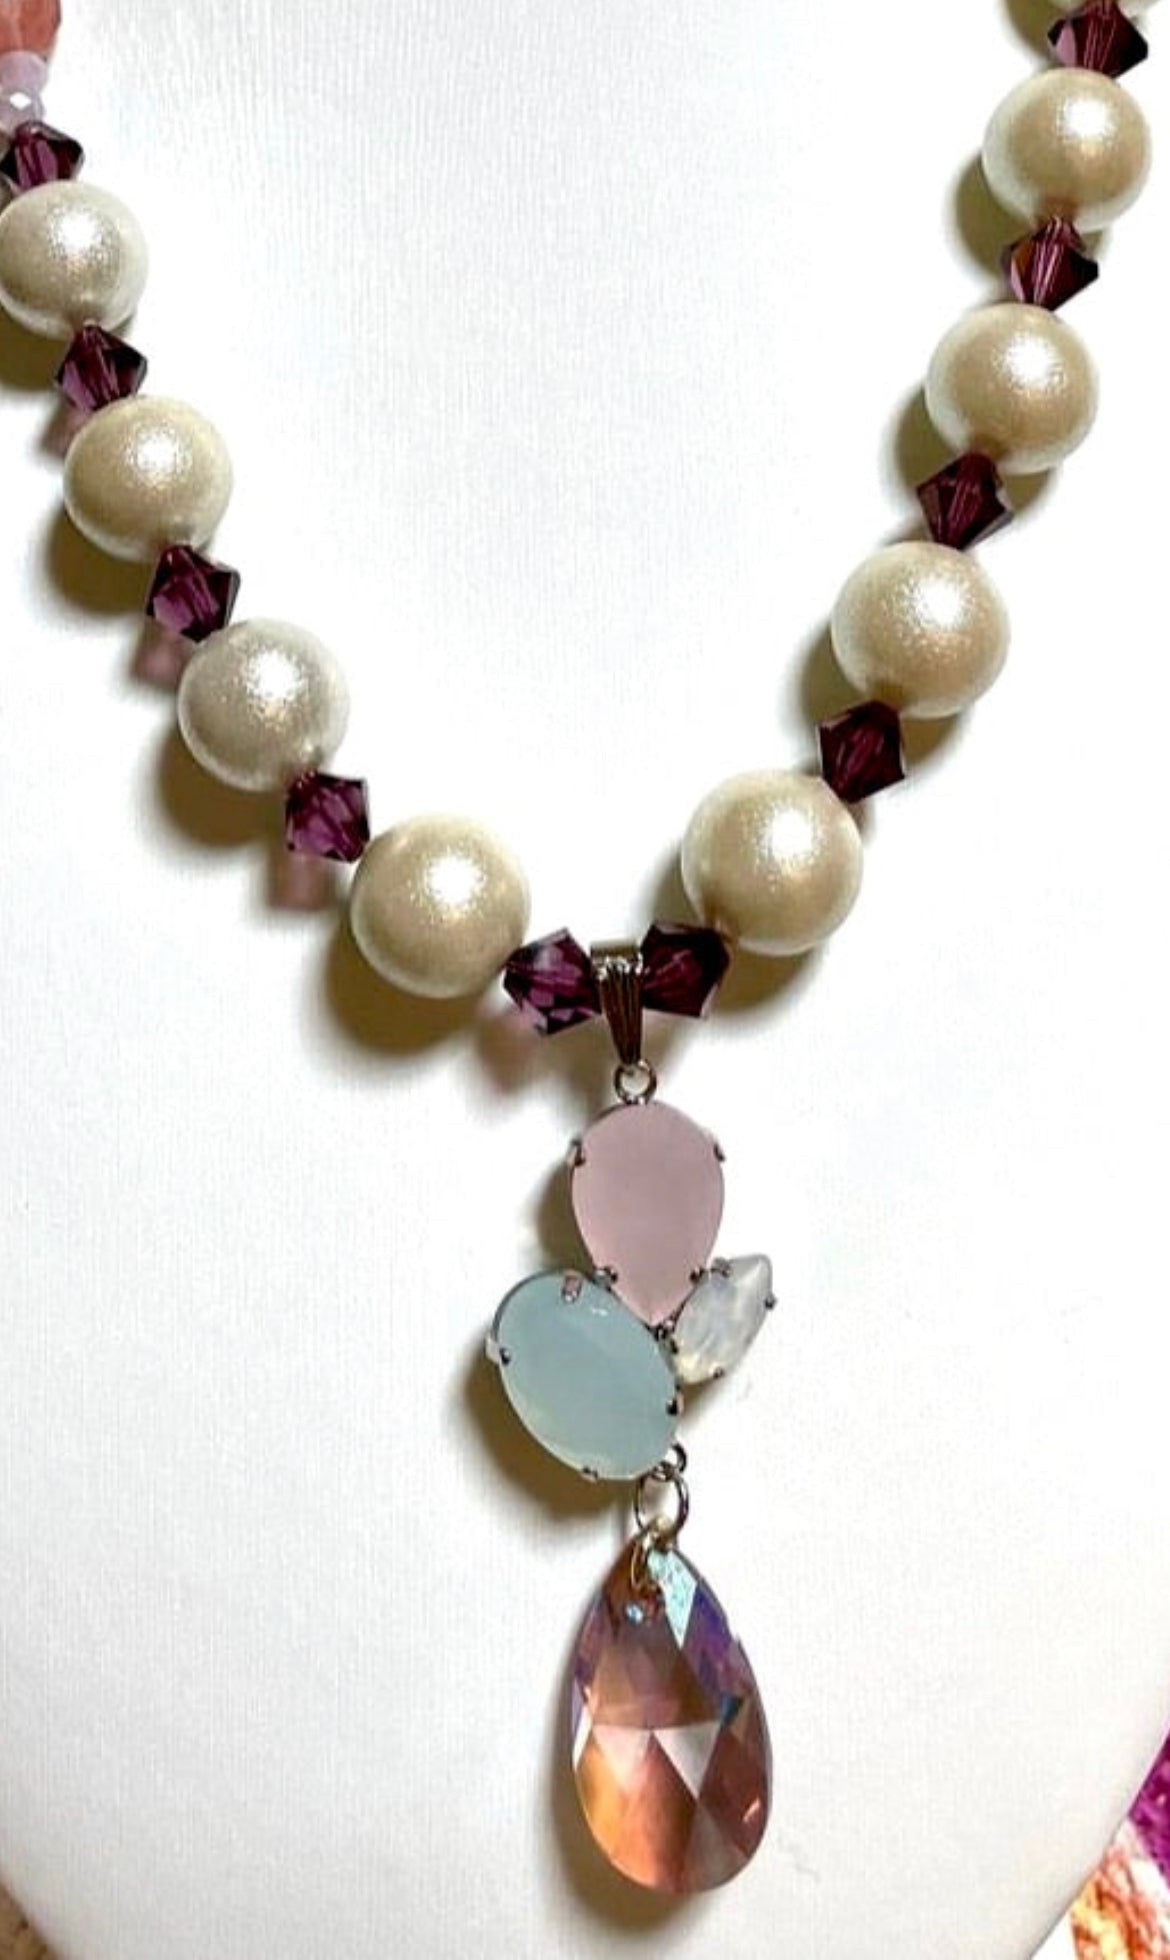 Pearls beads crystals necklace with pendant